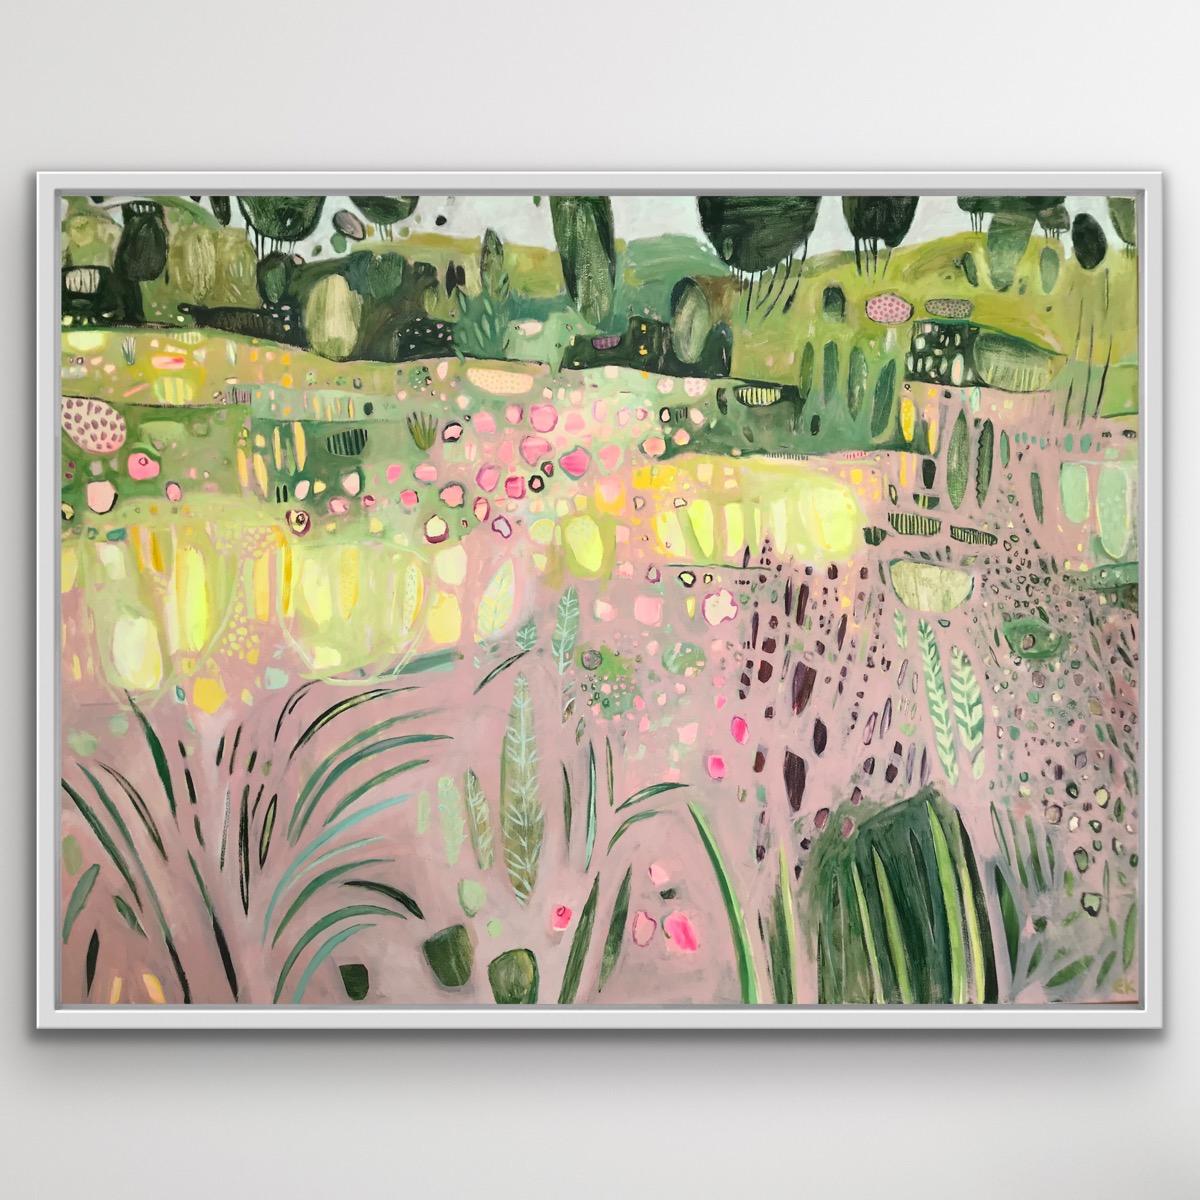 A Walk Through a Summer Garden' is just that - an immersive piece which is full of the joy of a walk in a sunny summer garden full of softly coloured flowers in pretty pastel shades of yellow, pink and green with some brighter pinks and yellows that